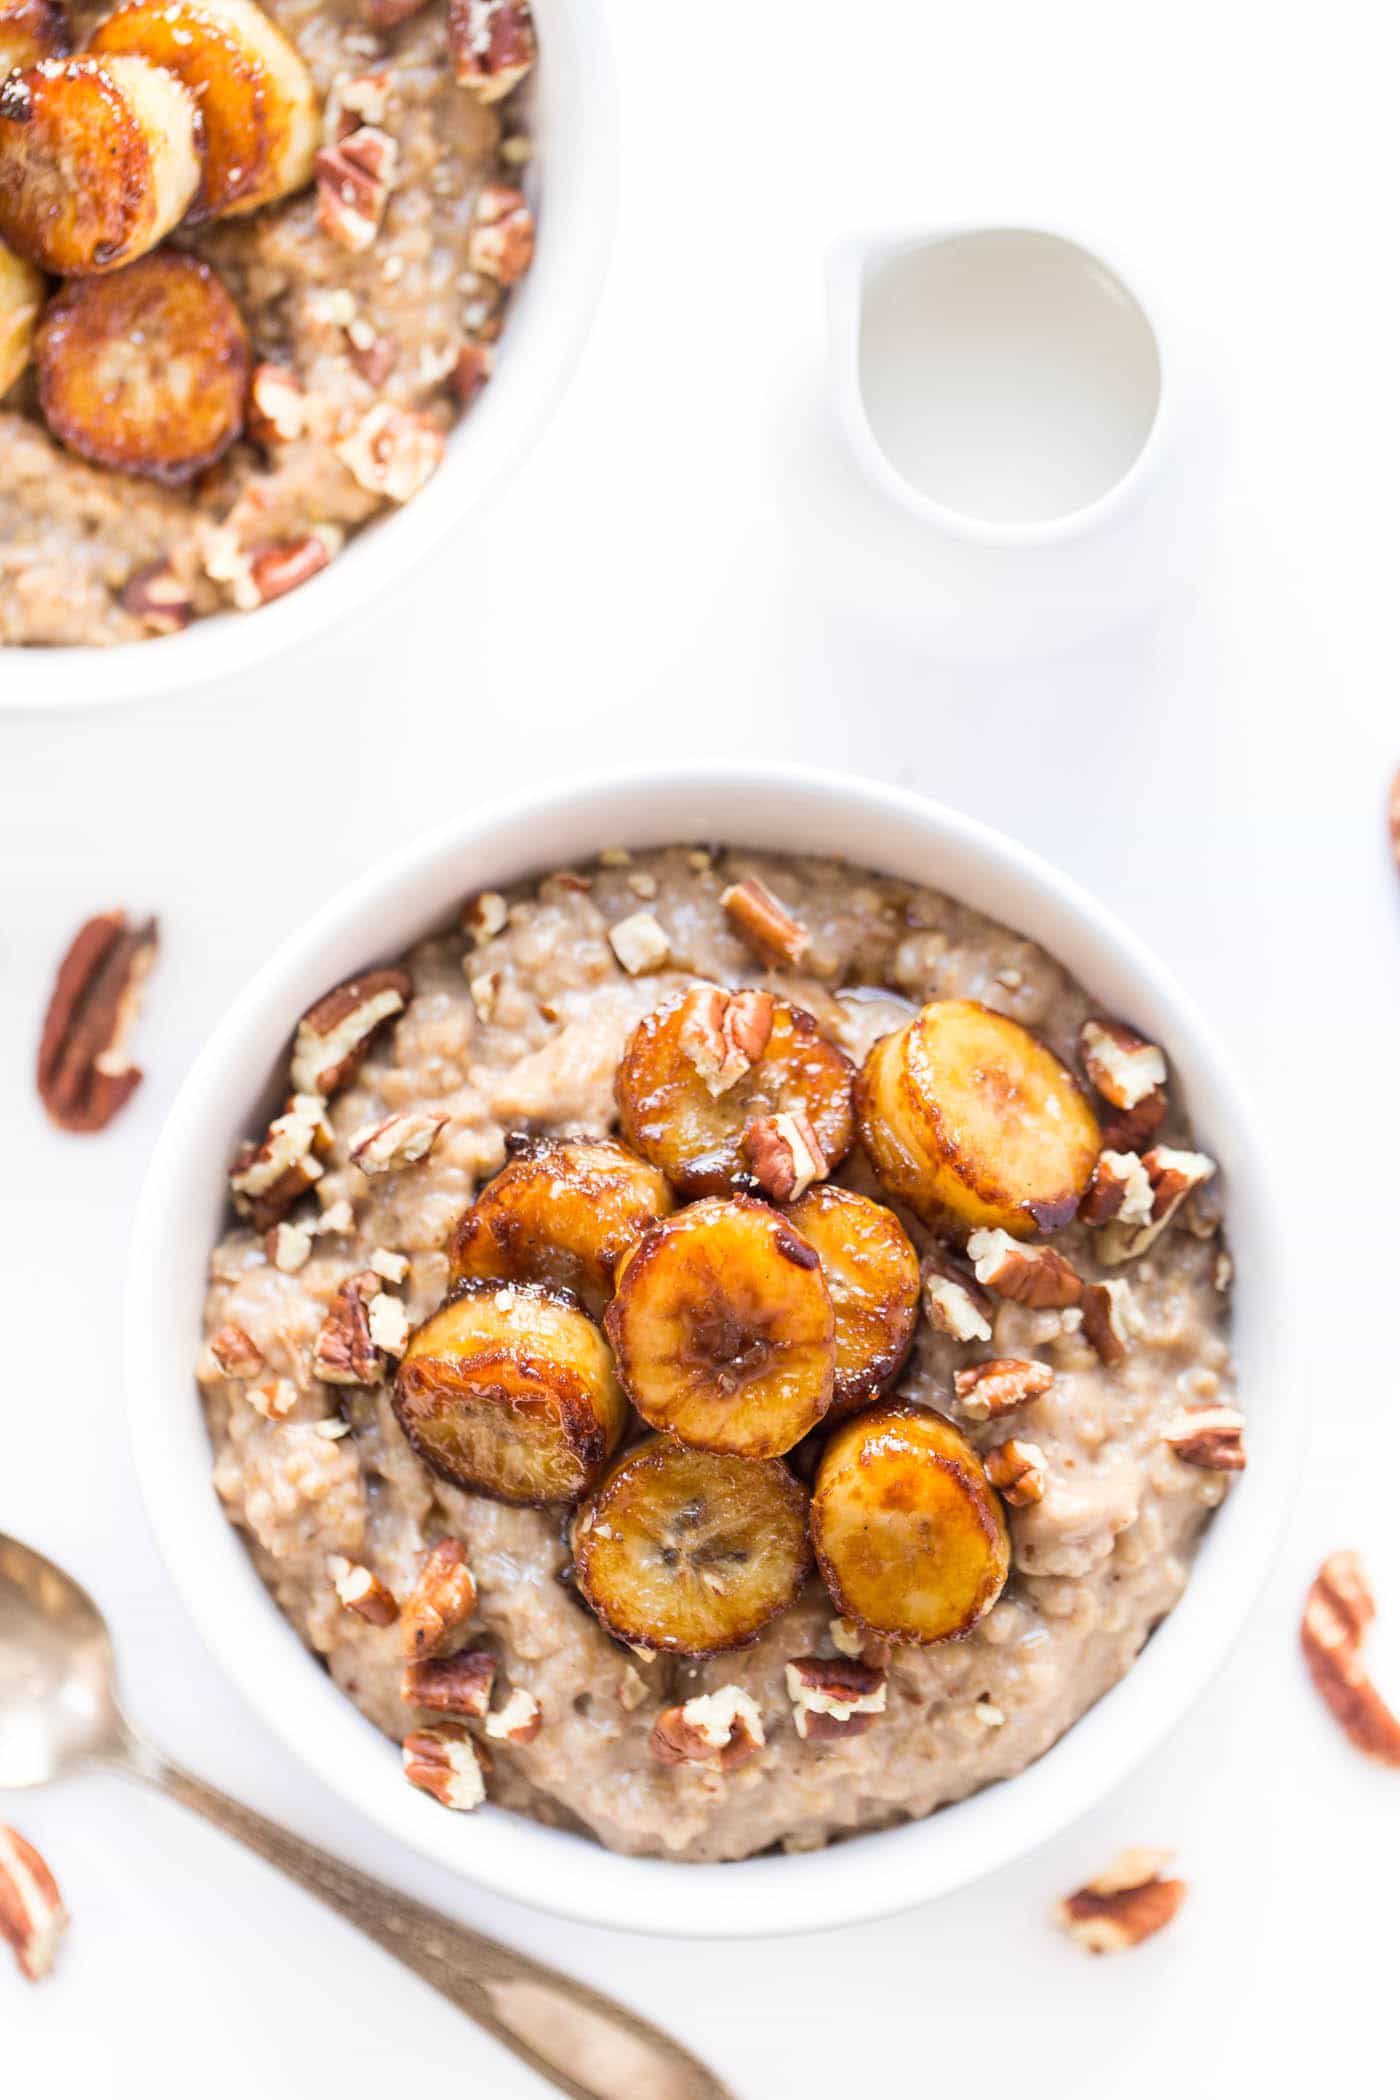 This is my method for making the CREAMIEST steel cut oats on the planet. Served with pan-fried caramelized bananas and pecans, it becomes the ultimate breakfast bowl!